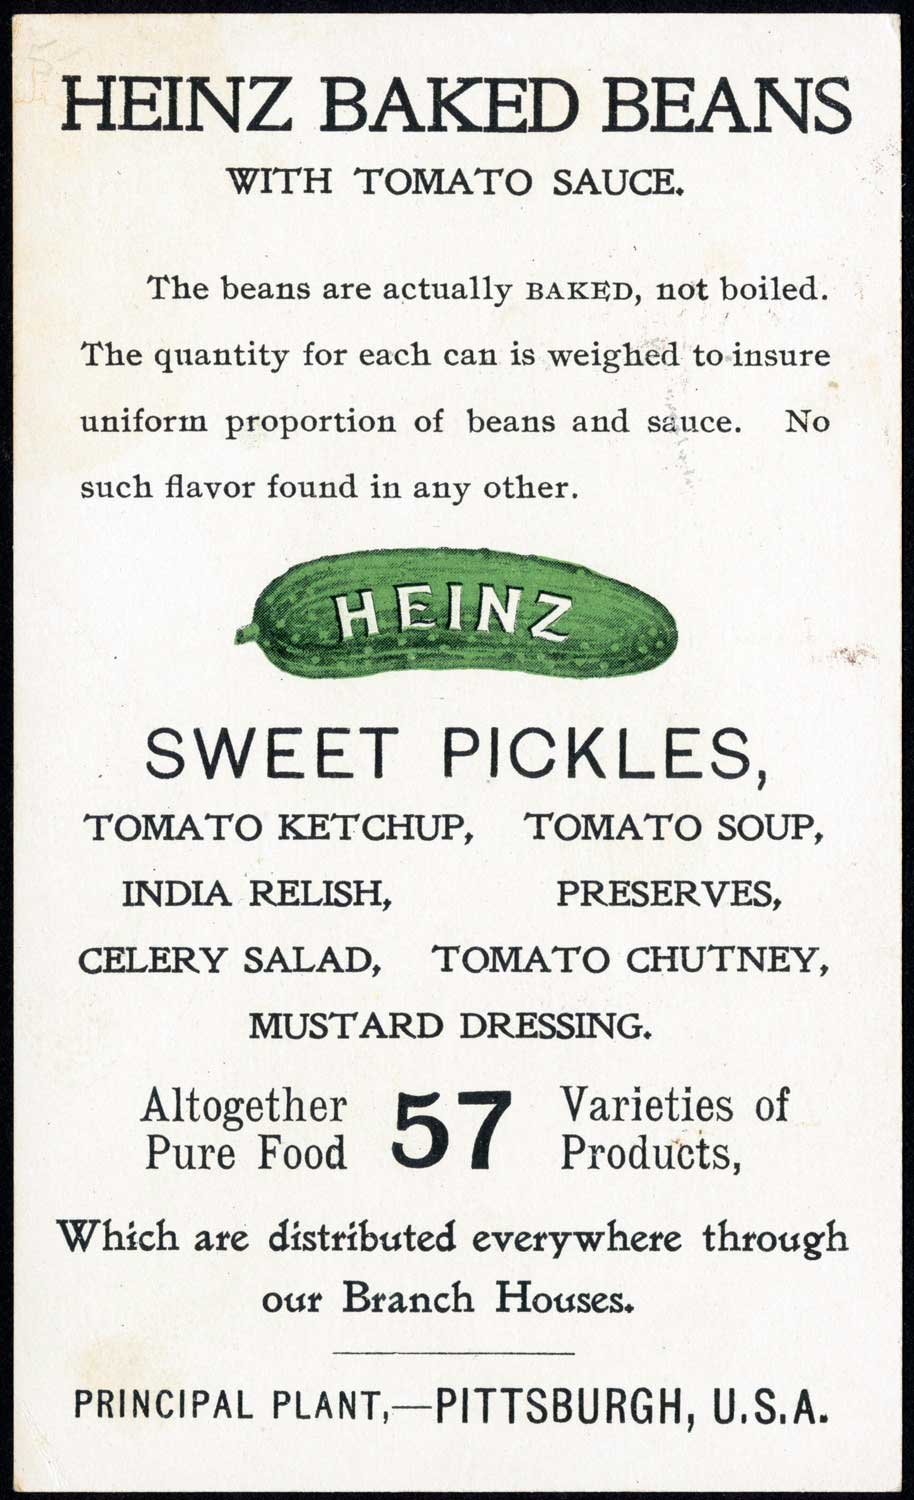 Heinz Baked Beans with Tomato Sauce trading card. c. 1895 - 1900